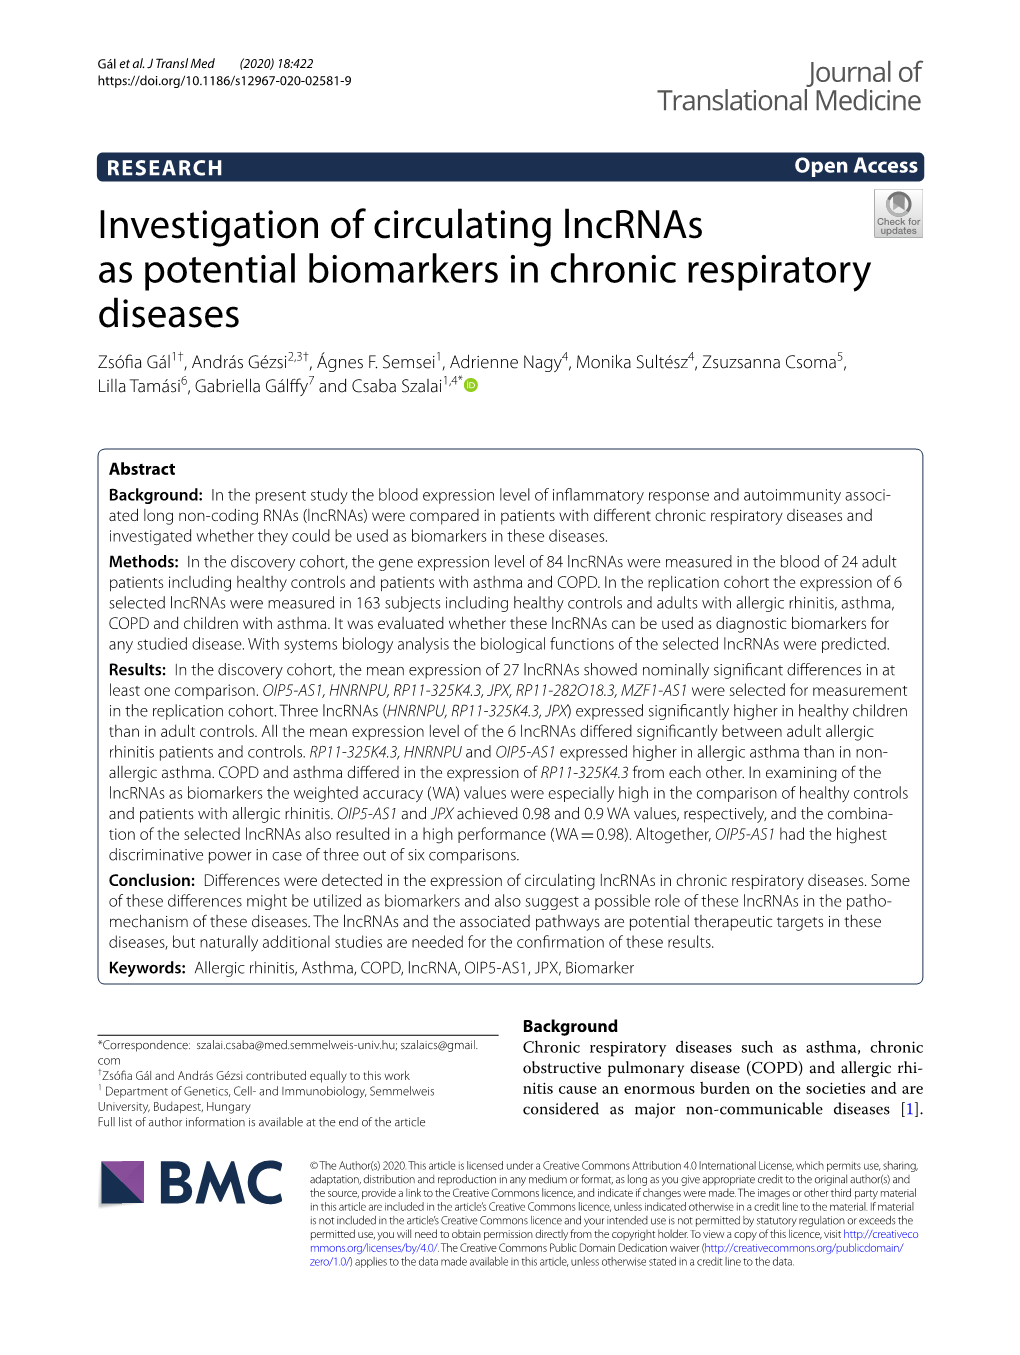 Investigation of Circulating Lncrnas As Potential Biomarkers in Chronic Respiratory Diseases Zsófa Gál1†, András Gézsi2,3†, Ágnes F